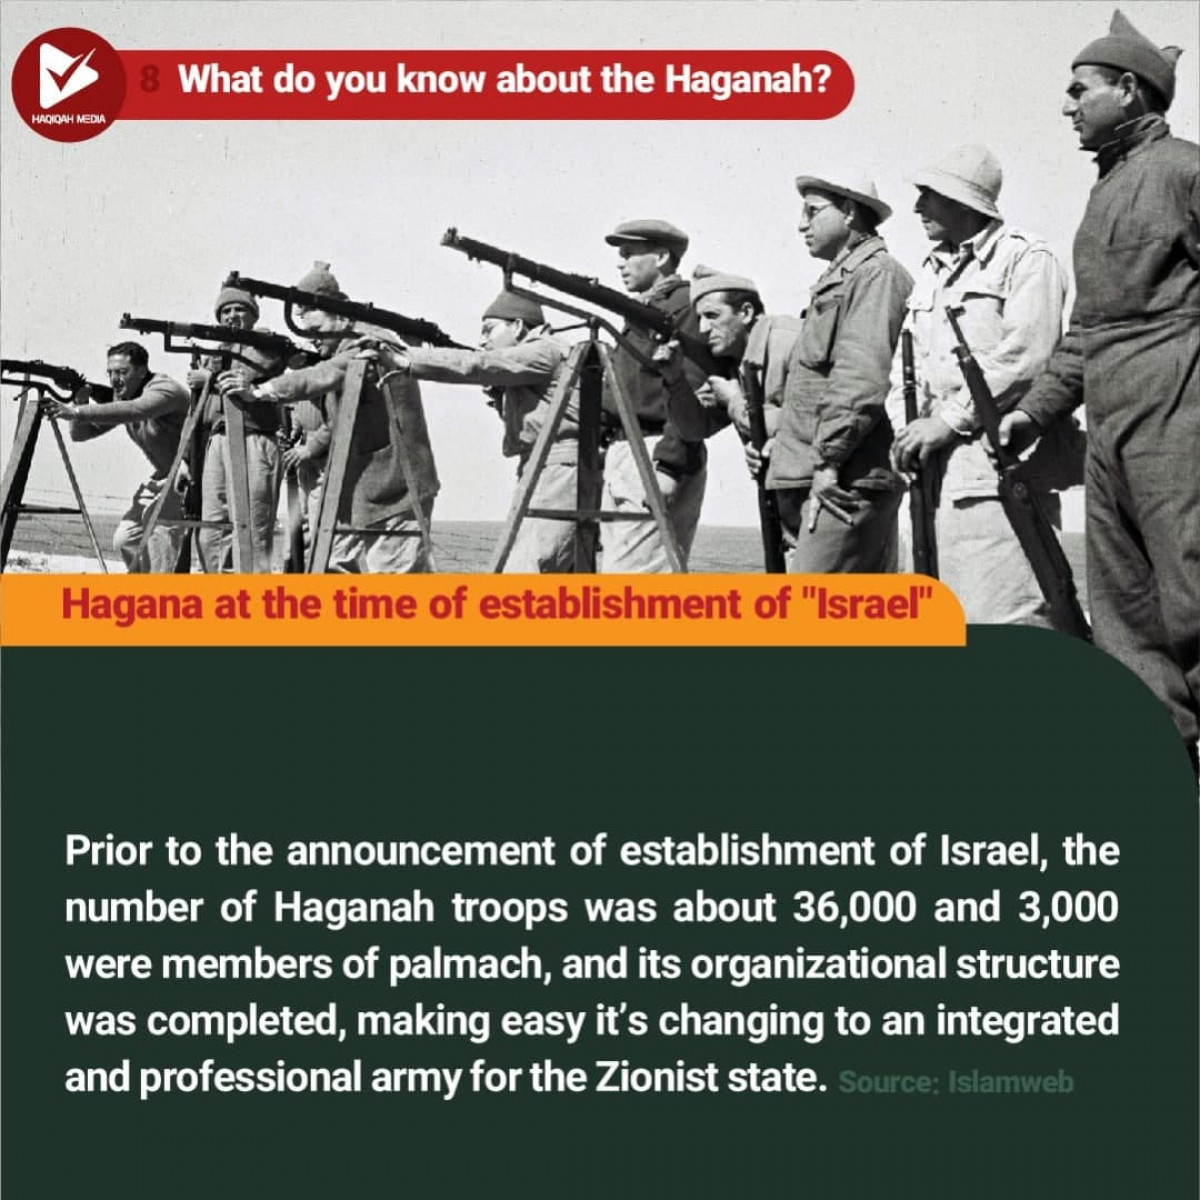 What do you know about the Haganah? 8